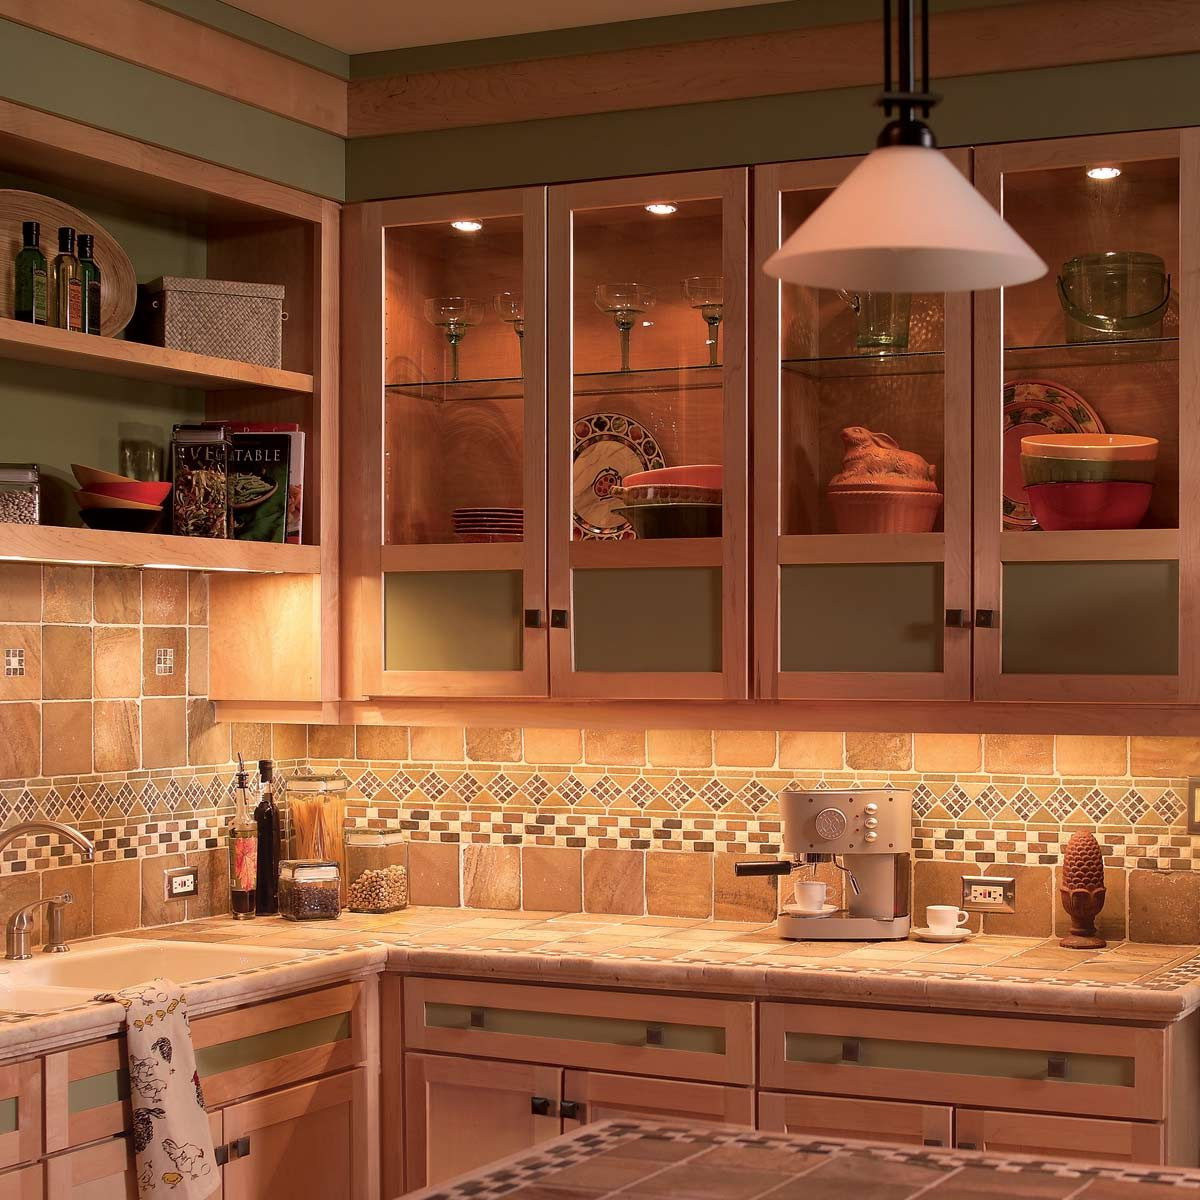 Kitchen Lighting Cabinet
 How to Install Under Cabinet Lighting in Your Kitchen